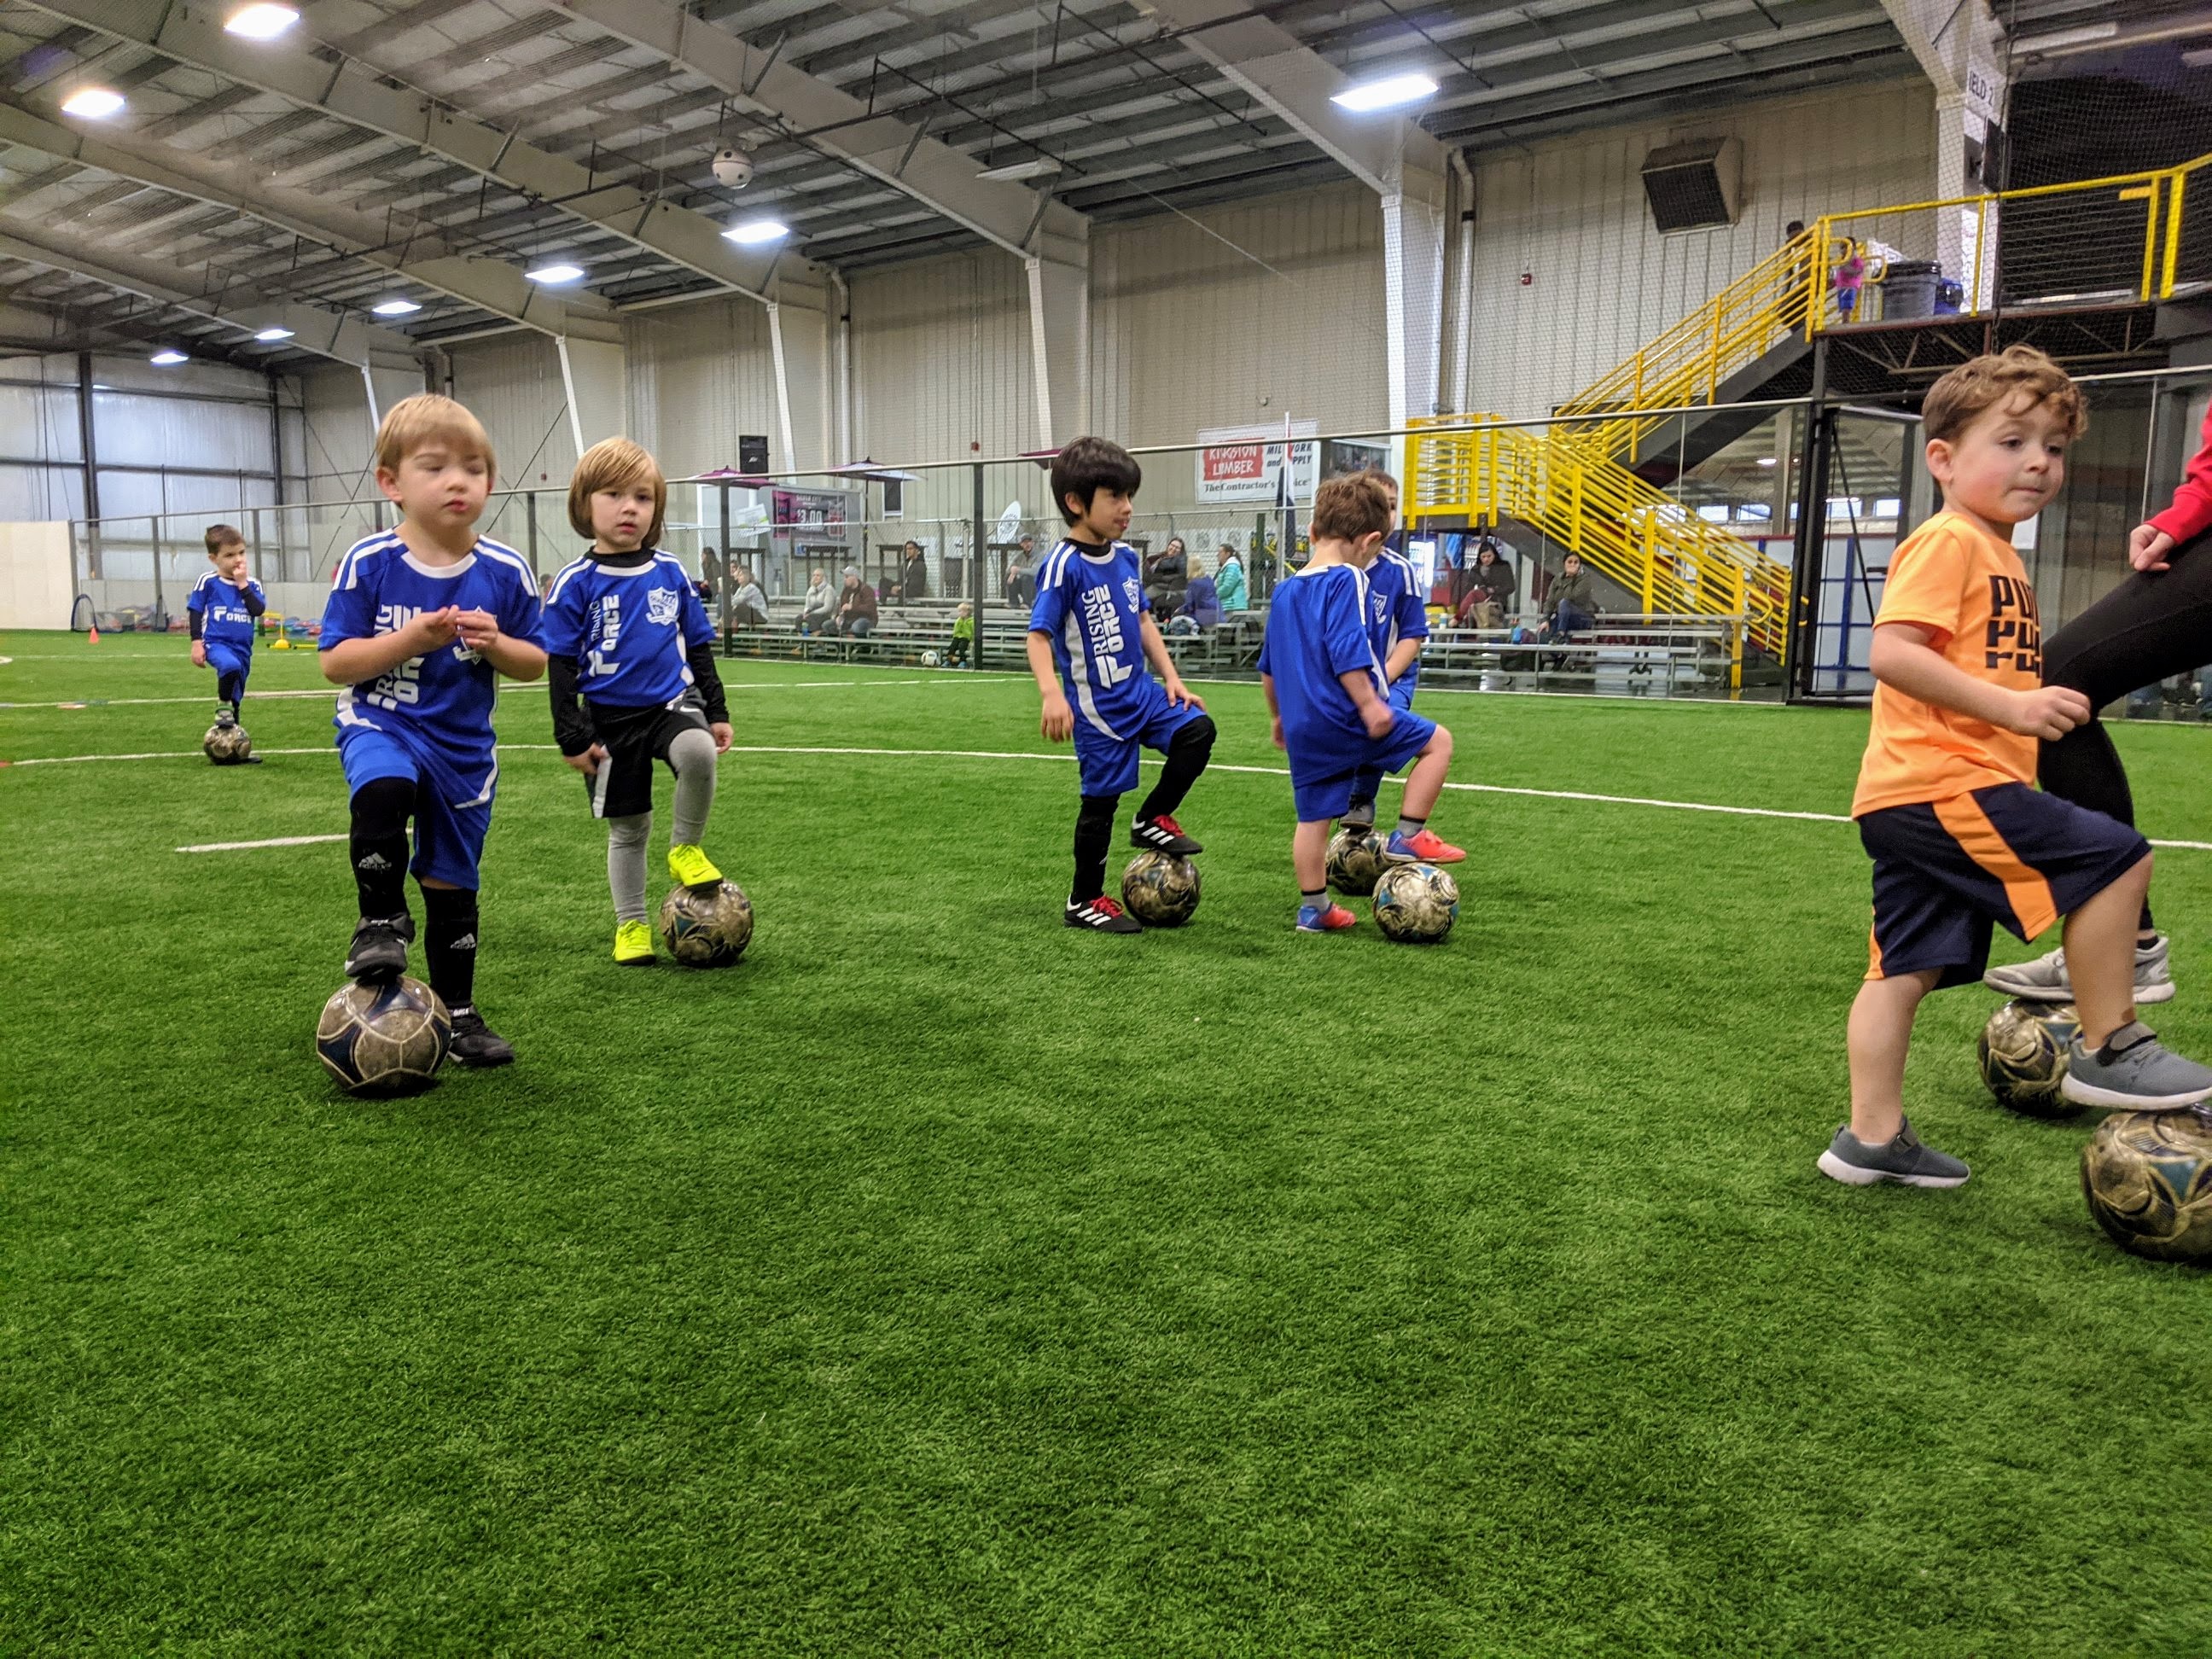 Children, each with one foot on their soccer ball, participating in a Rising Force Academy class at Bremerton Sports Center